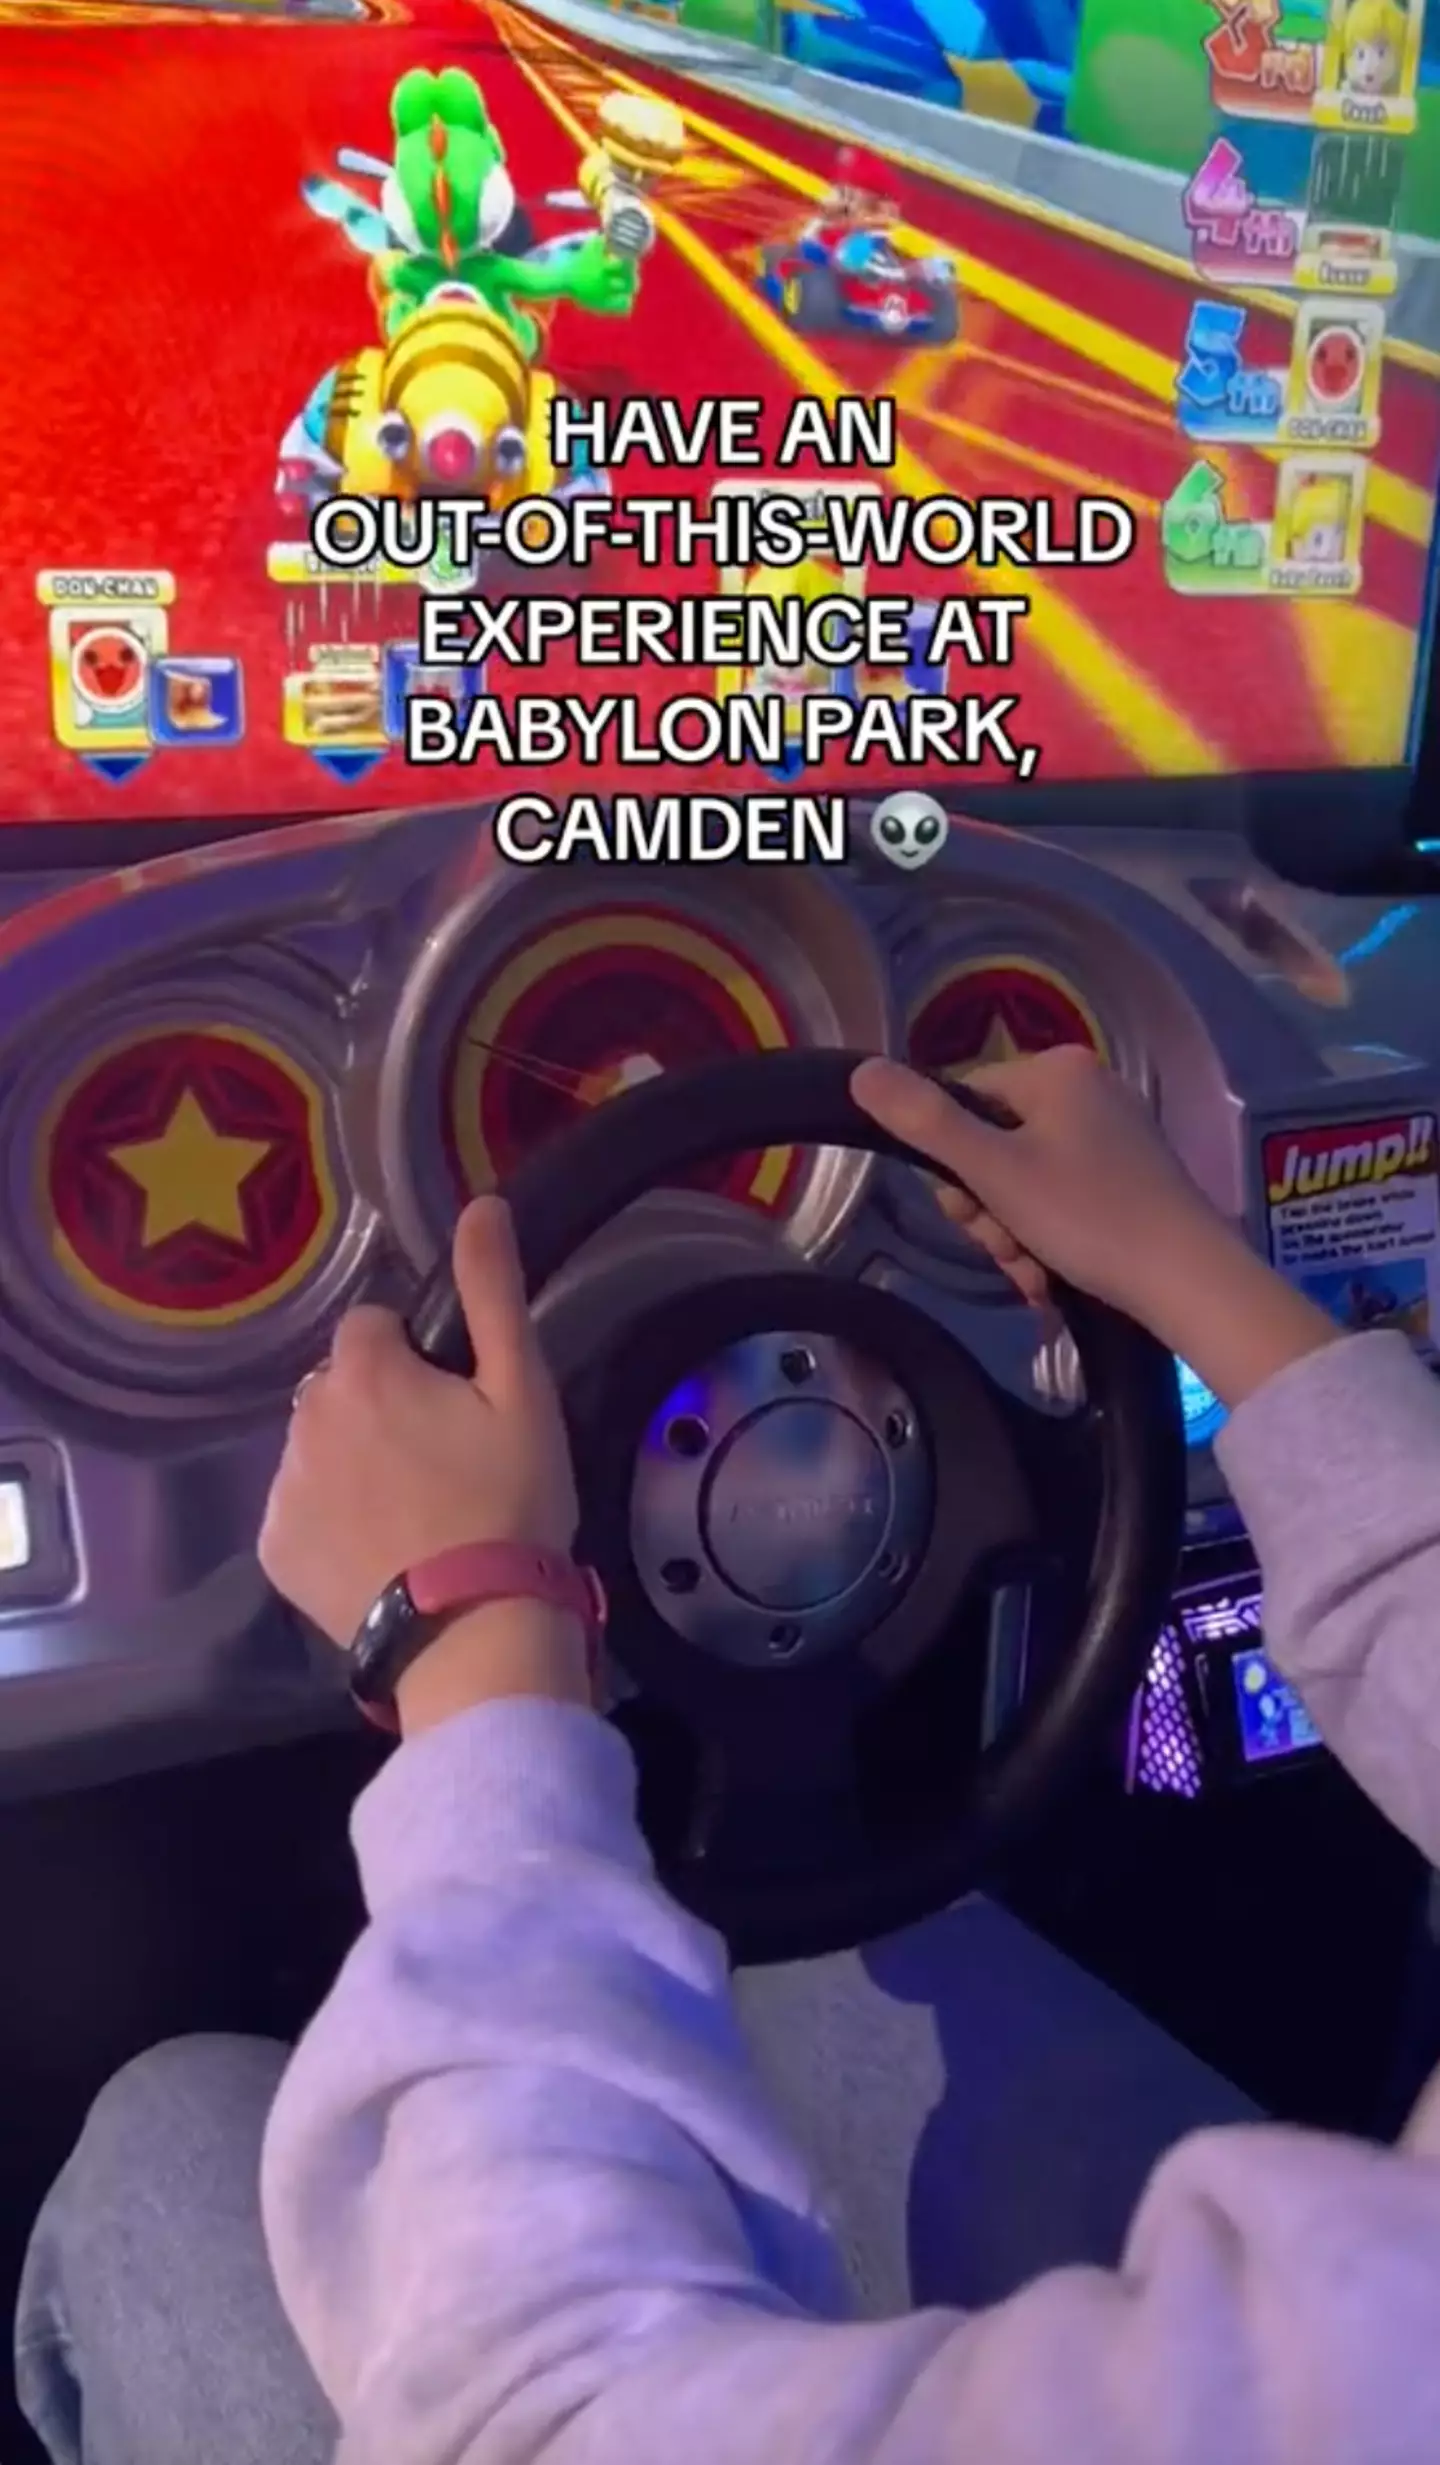 You can also play loads of arcade games.